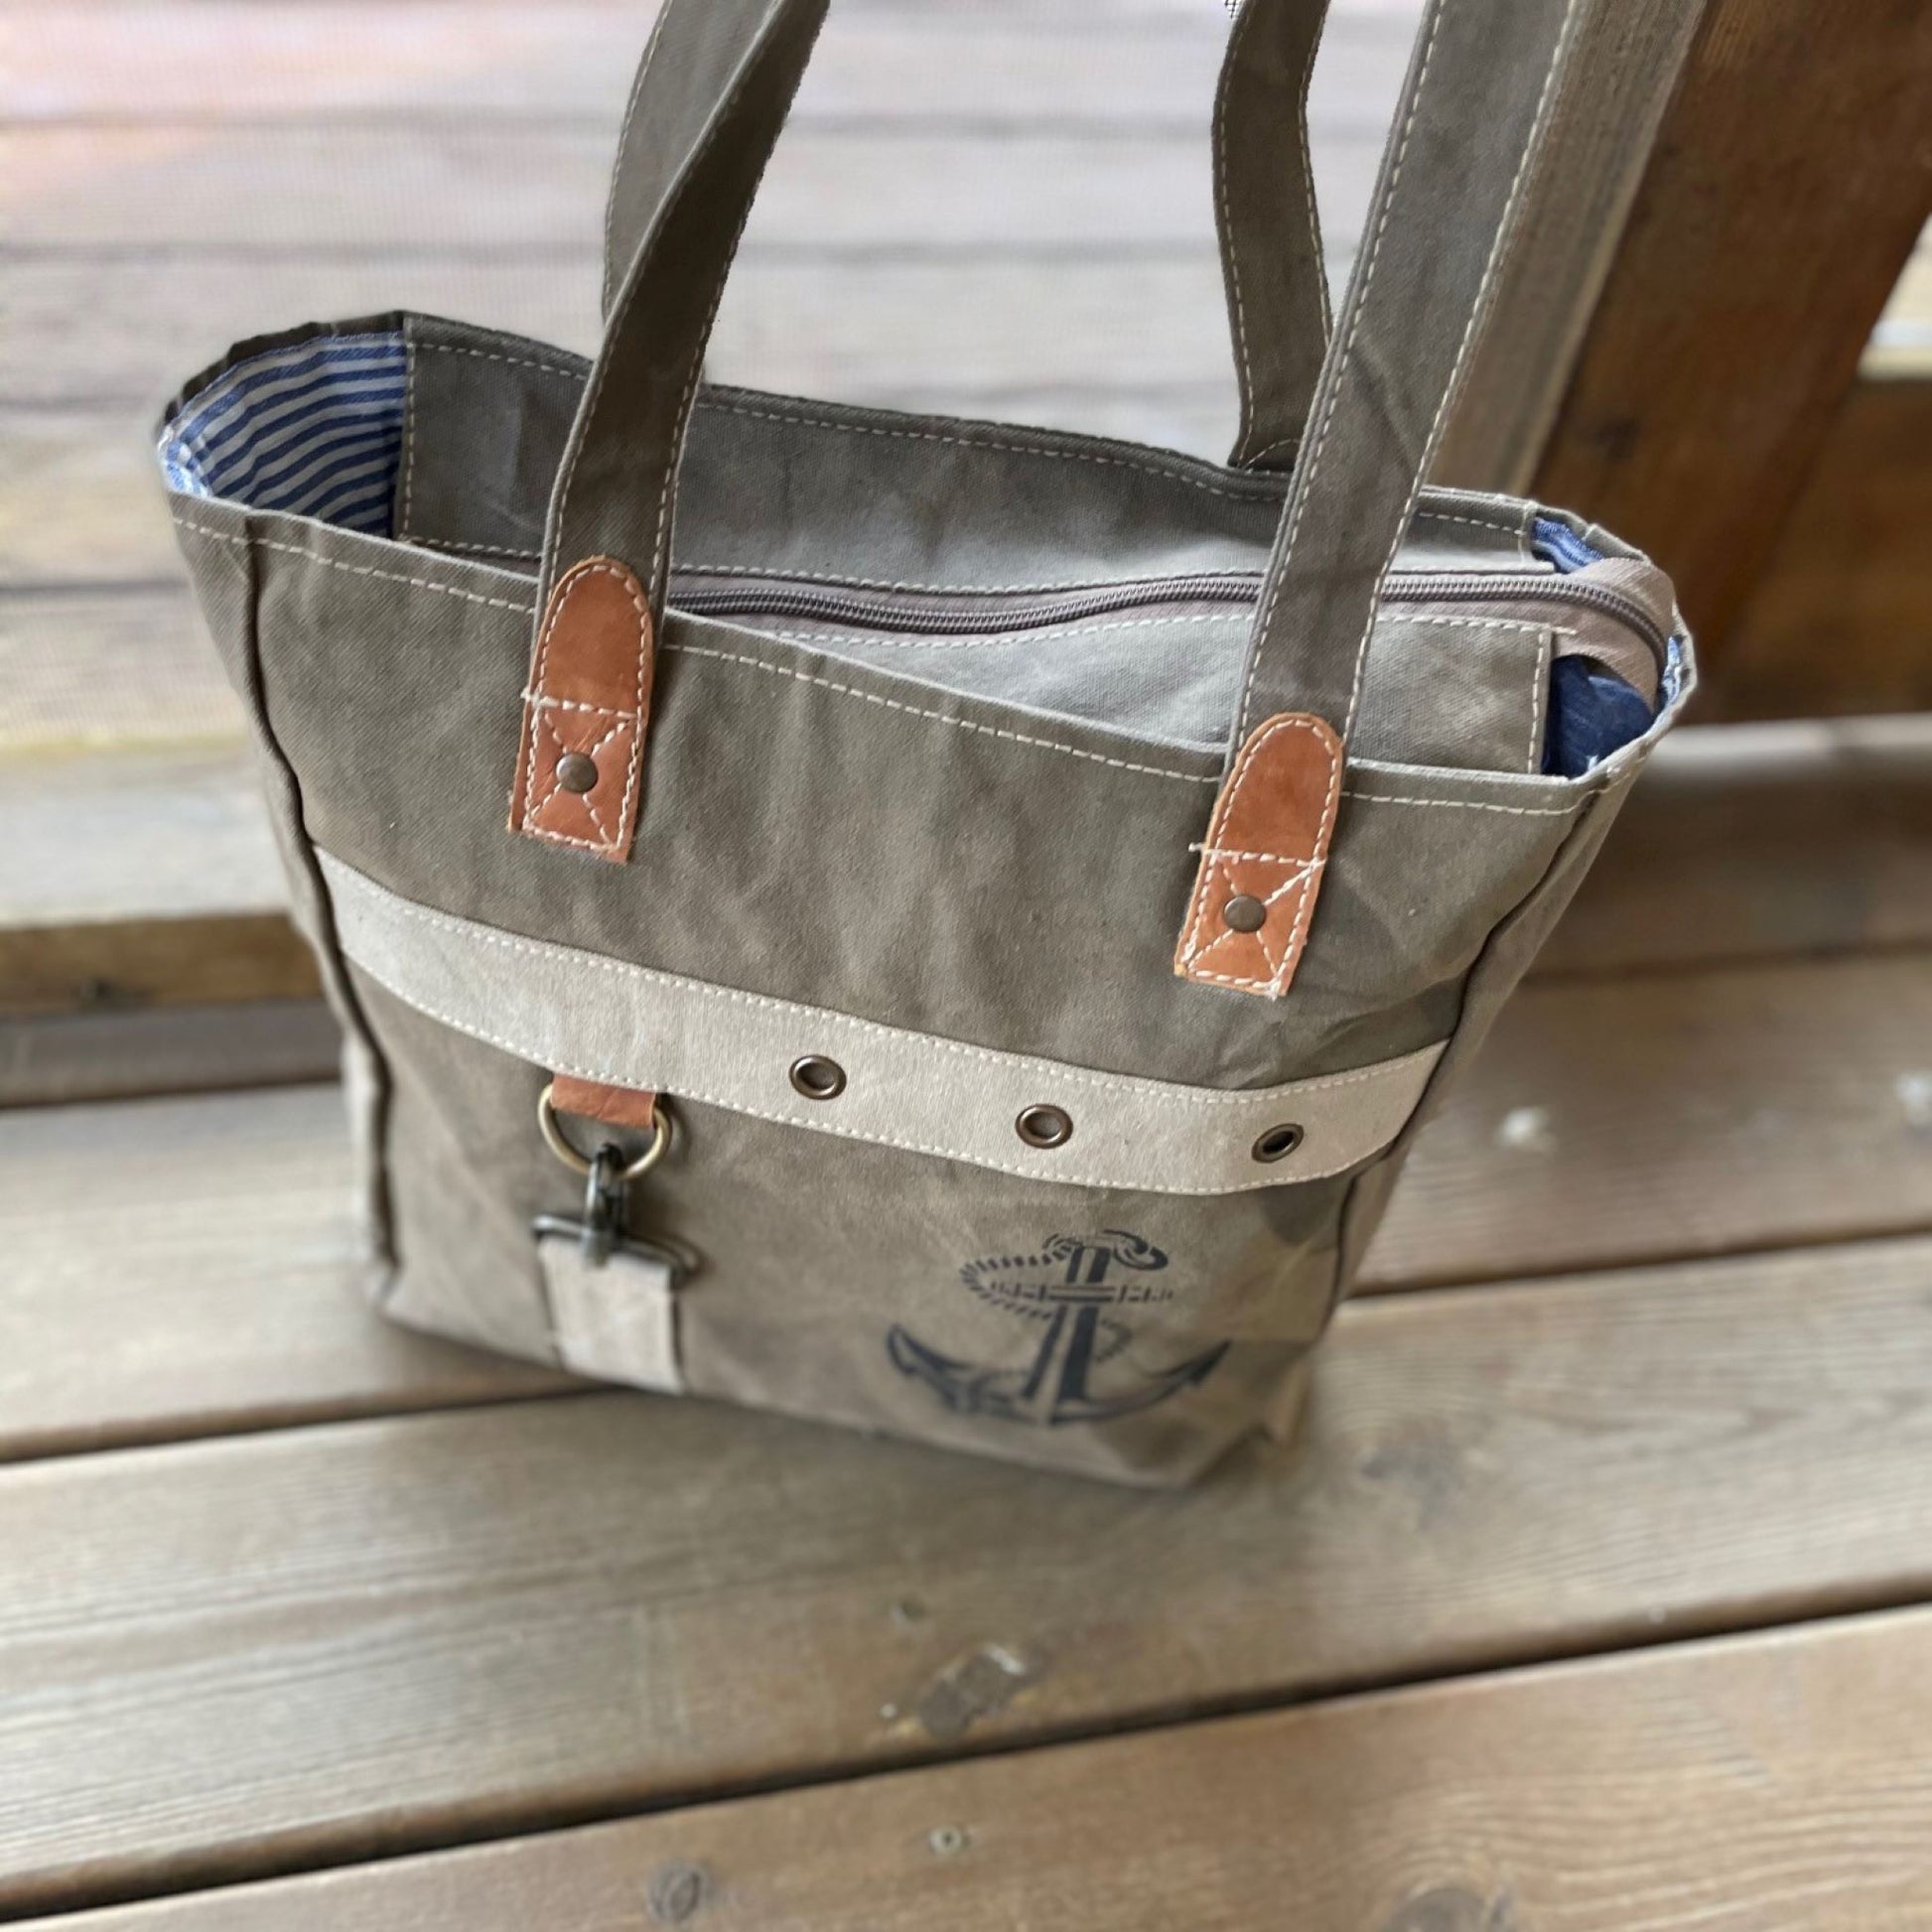 Meet the Sisters Creating All-American Bags Out of Recycled Military Goods